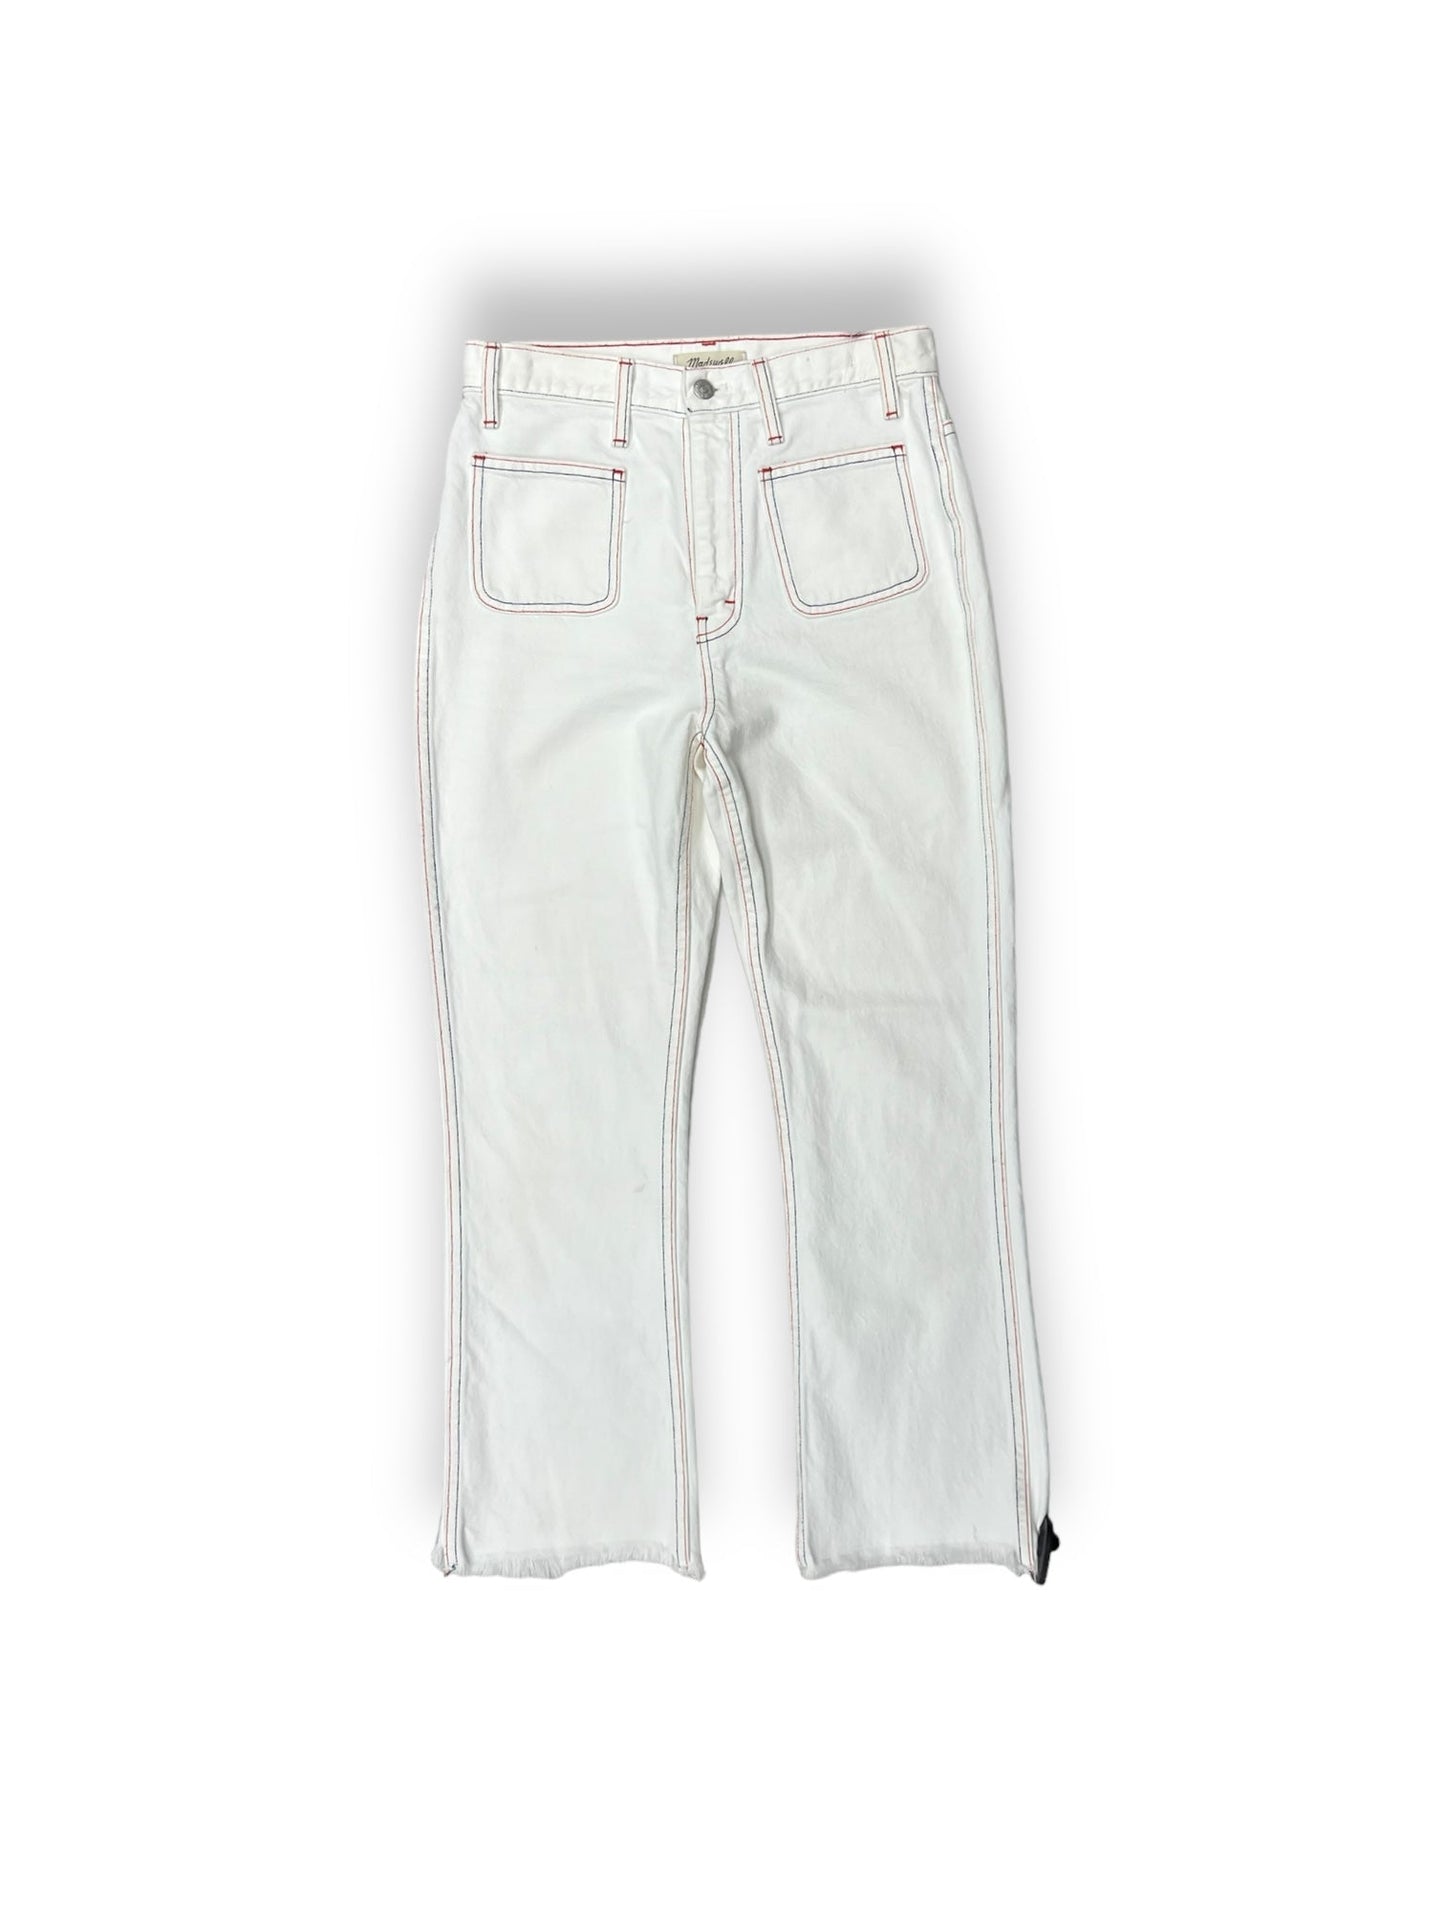 White Jeans Cropped Madewell, Size 27